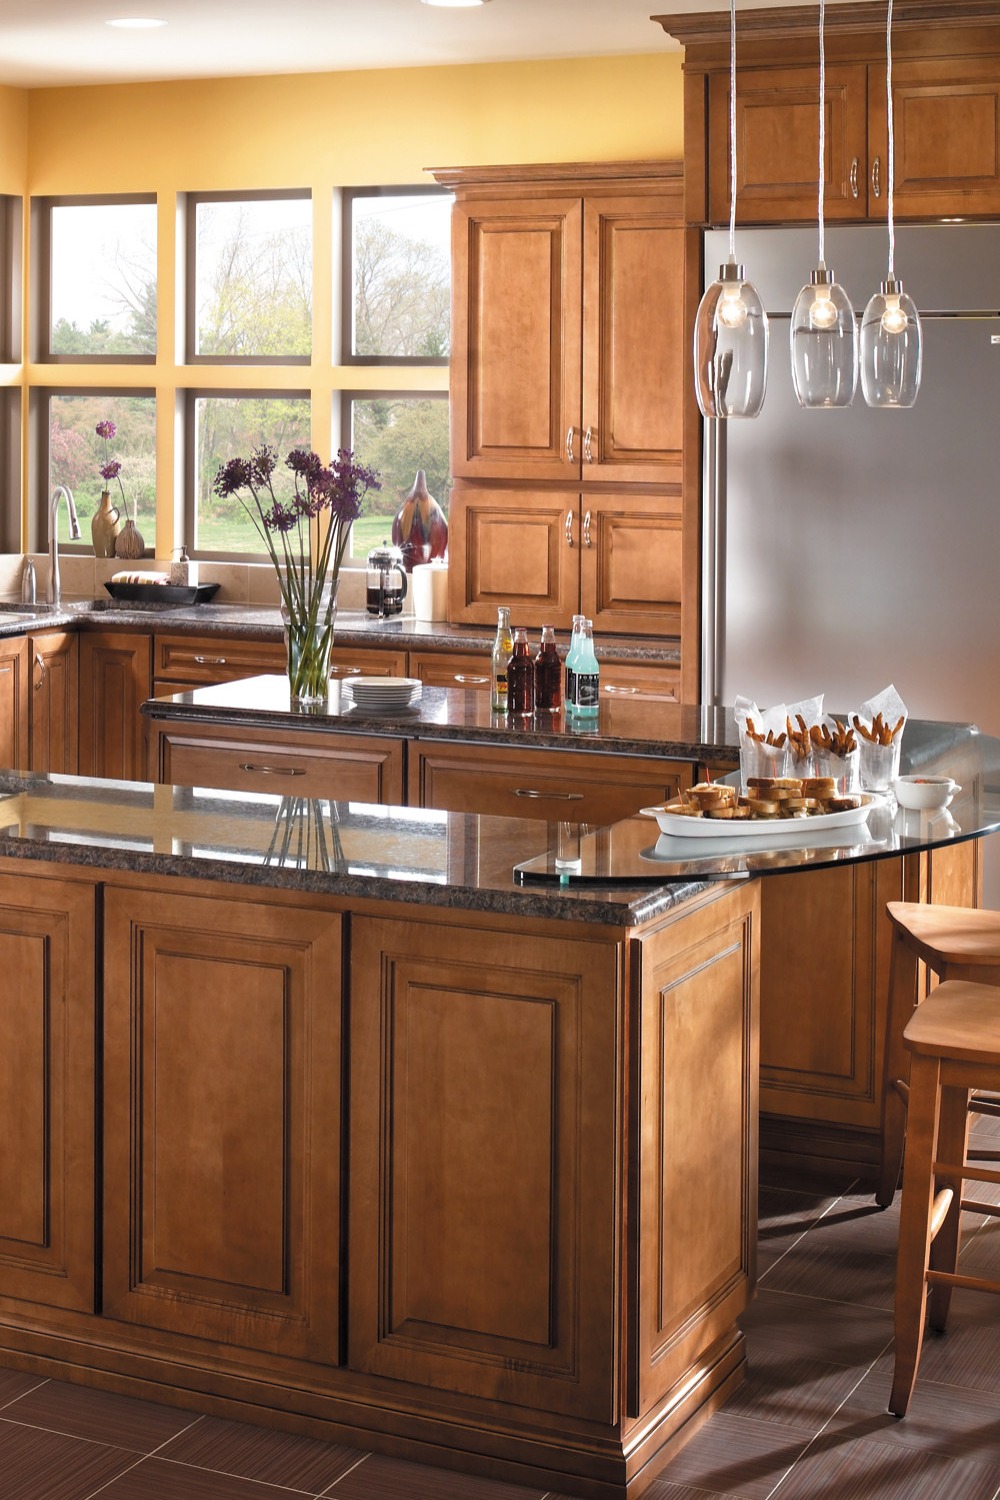 Granite Countertops Cabinets Glass Countertops Recycled Glass Countertops